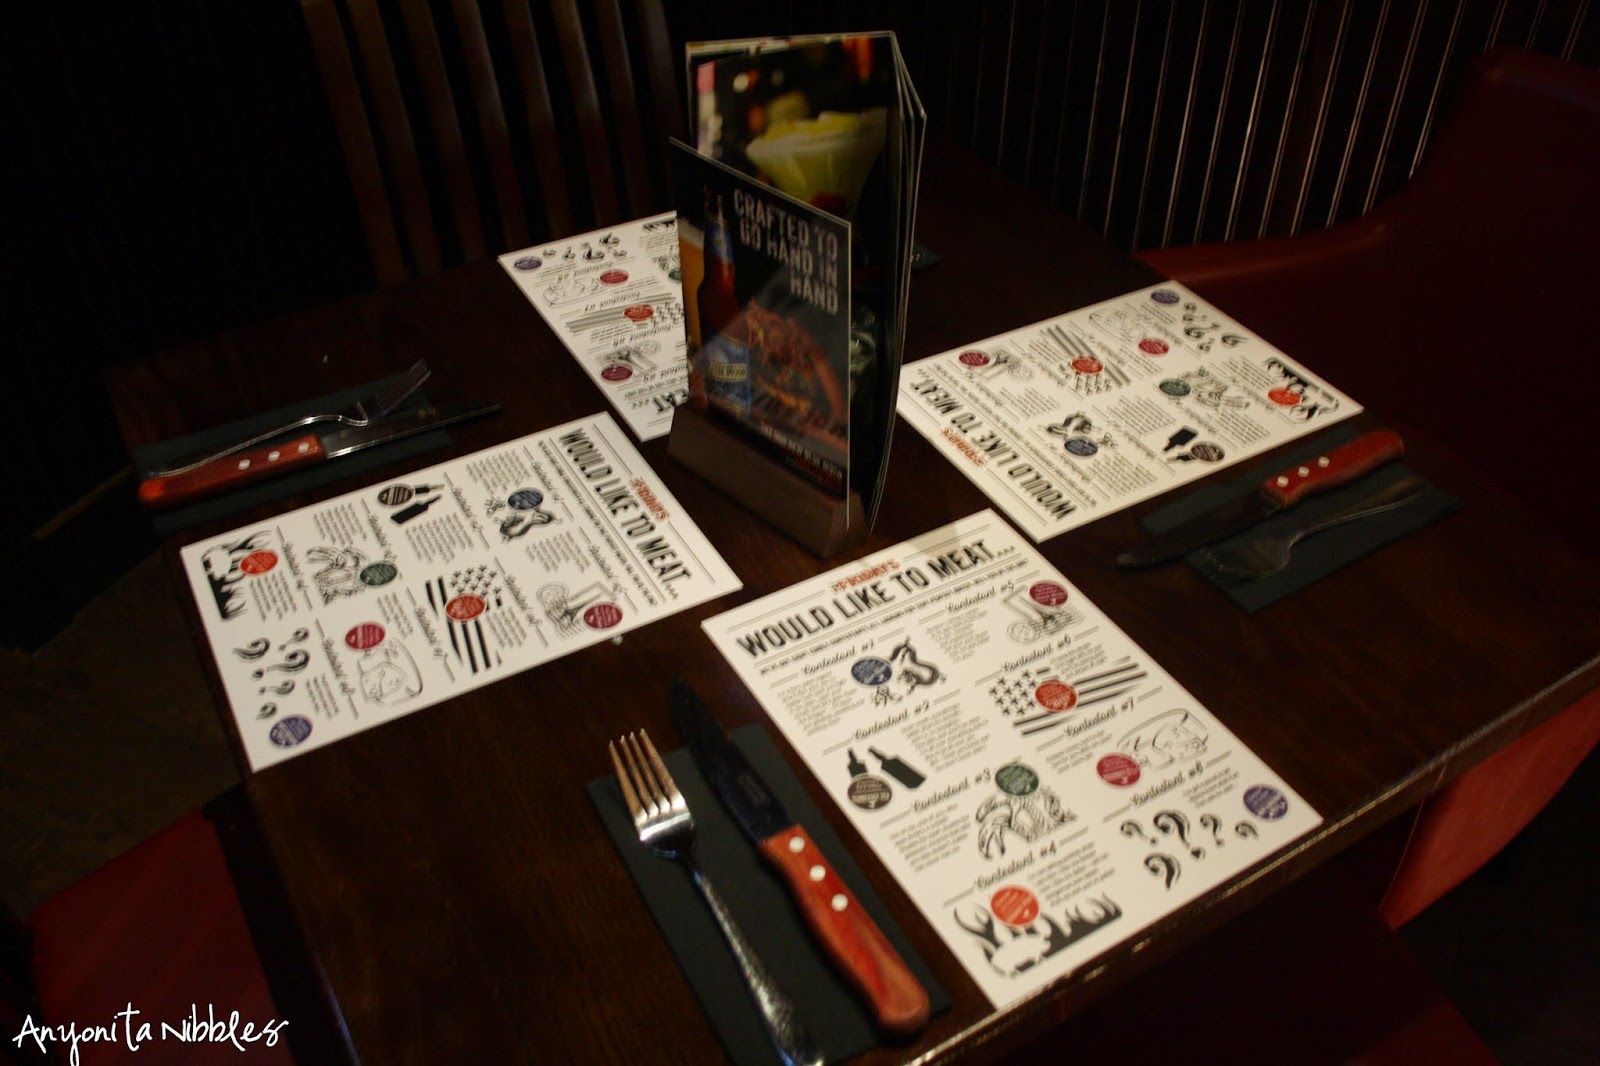 The burger blind date: an event from TGI Friday's